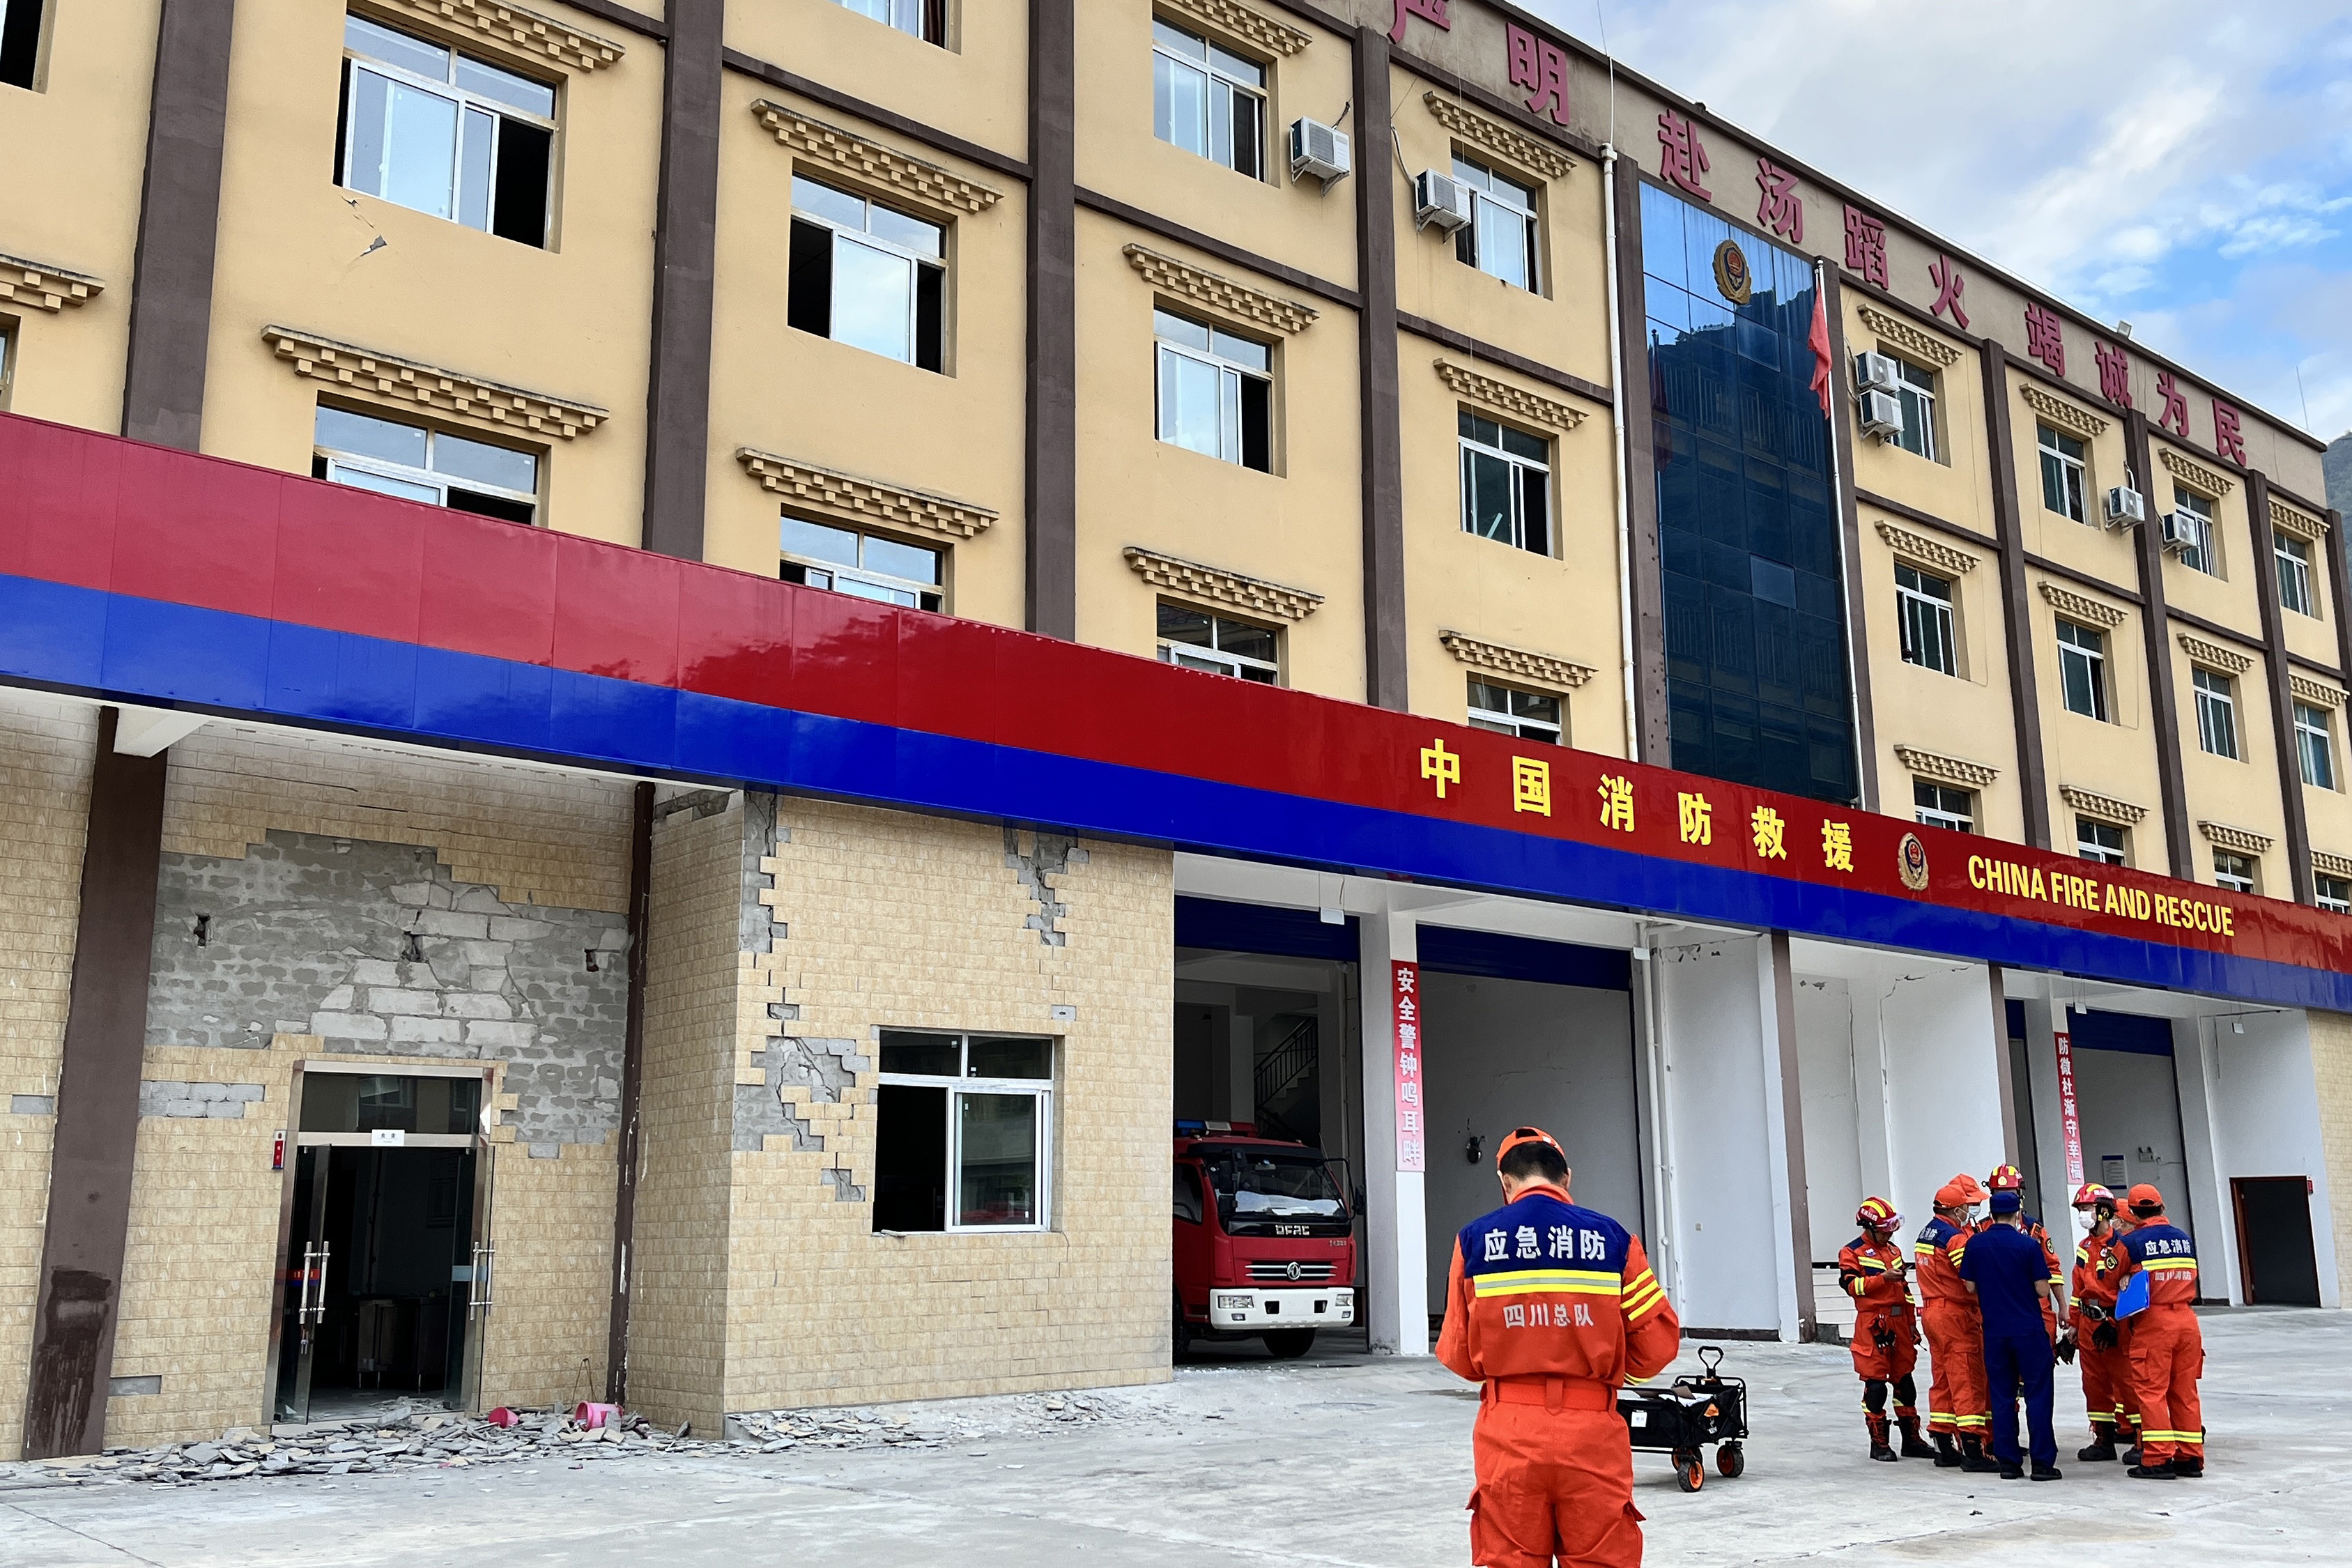 Firefighters gather near a damaged wall of a fire station after a 6.6-magnitude earthquake in Hailuogou in China's southwestern Sichuan province on September 5, 2022. (Photo by STR / AFP) / China OUT / CHINA OUT